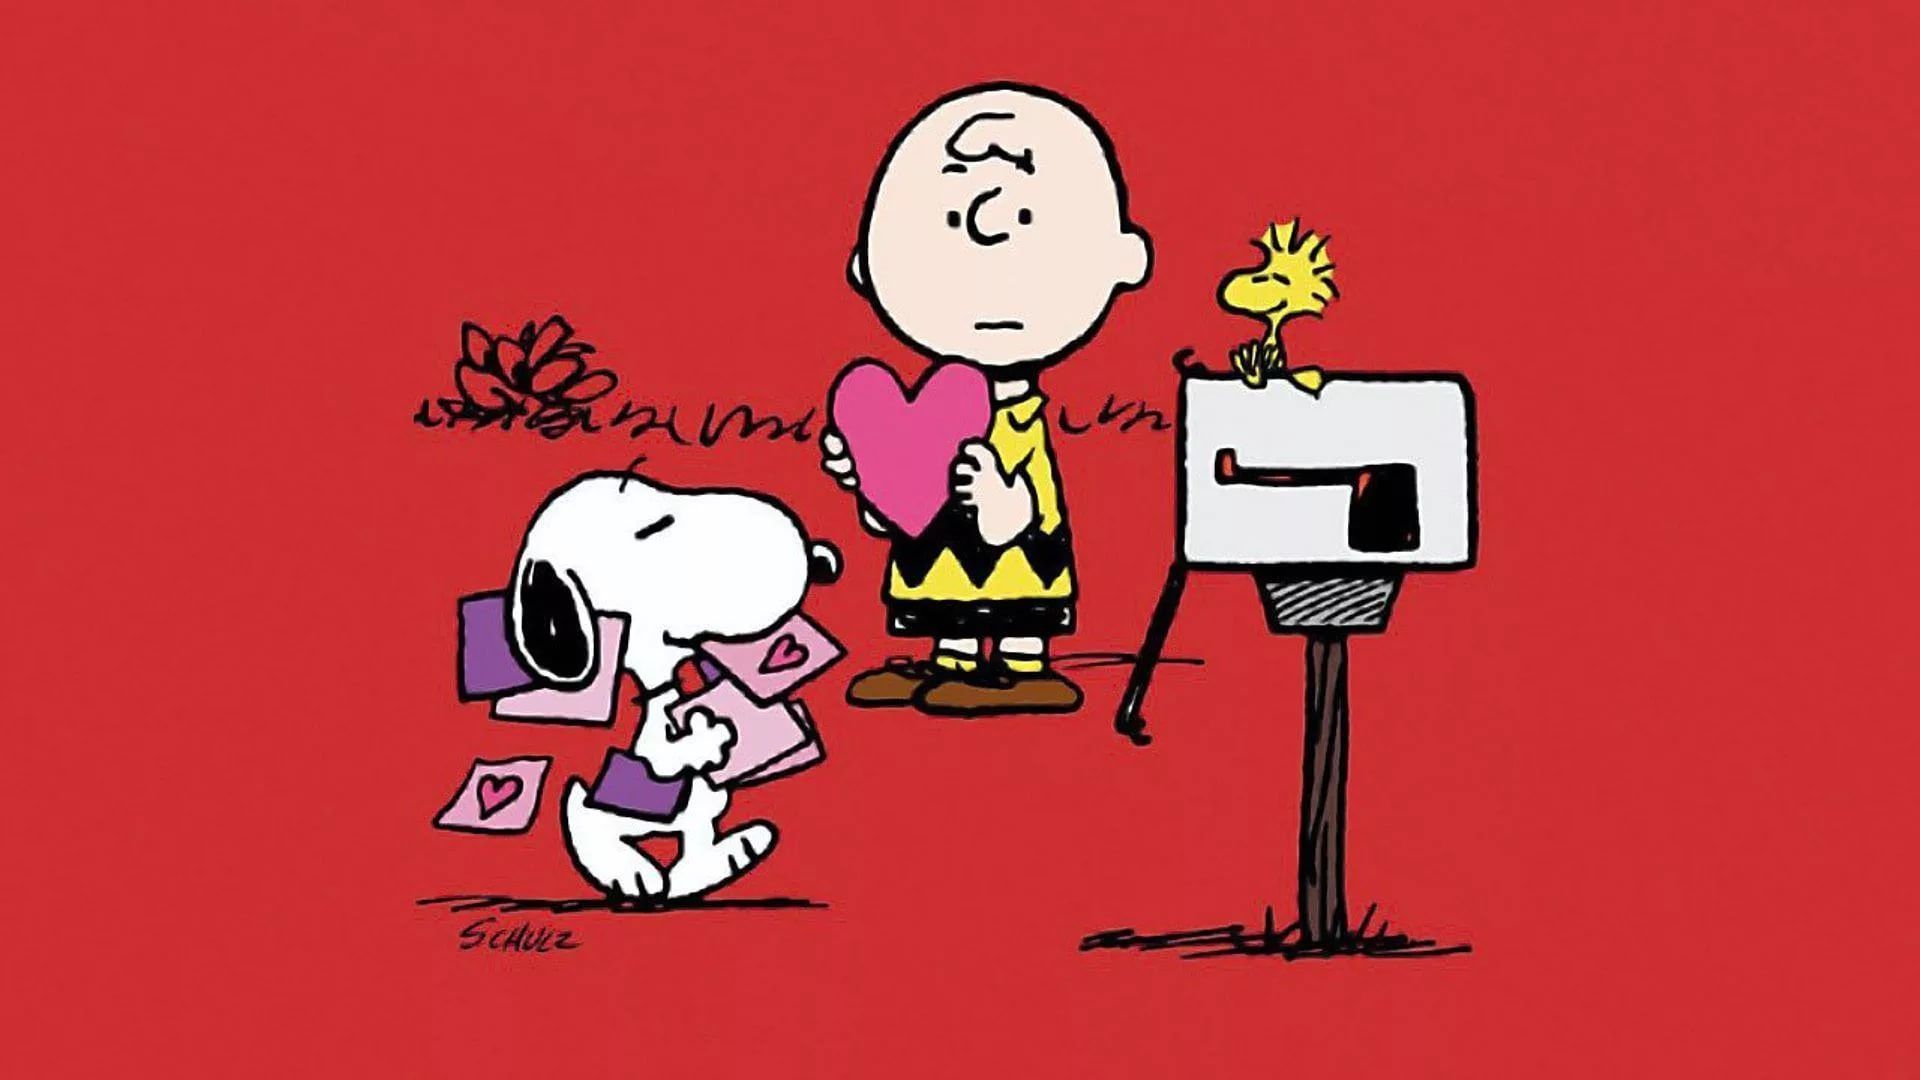 Charlie Brown and Snoopy Valentine's Day Wallpapers | The ... - Snoopy, Valentine's Day, Charlie Brown